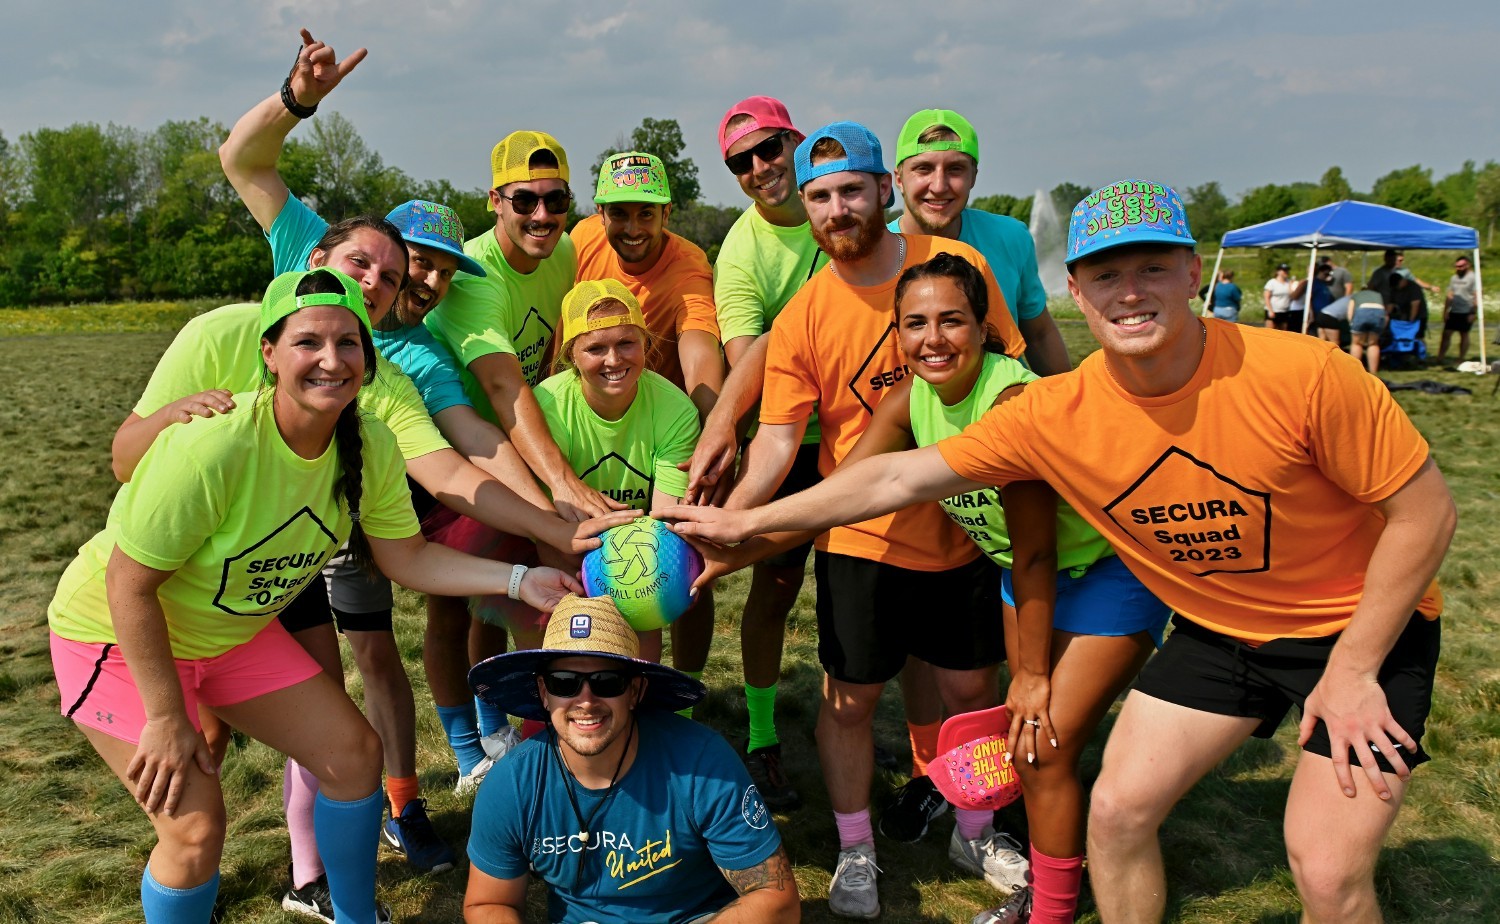 Associates participate in our annual kickball tournament to raise funds for United Way.